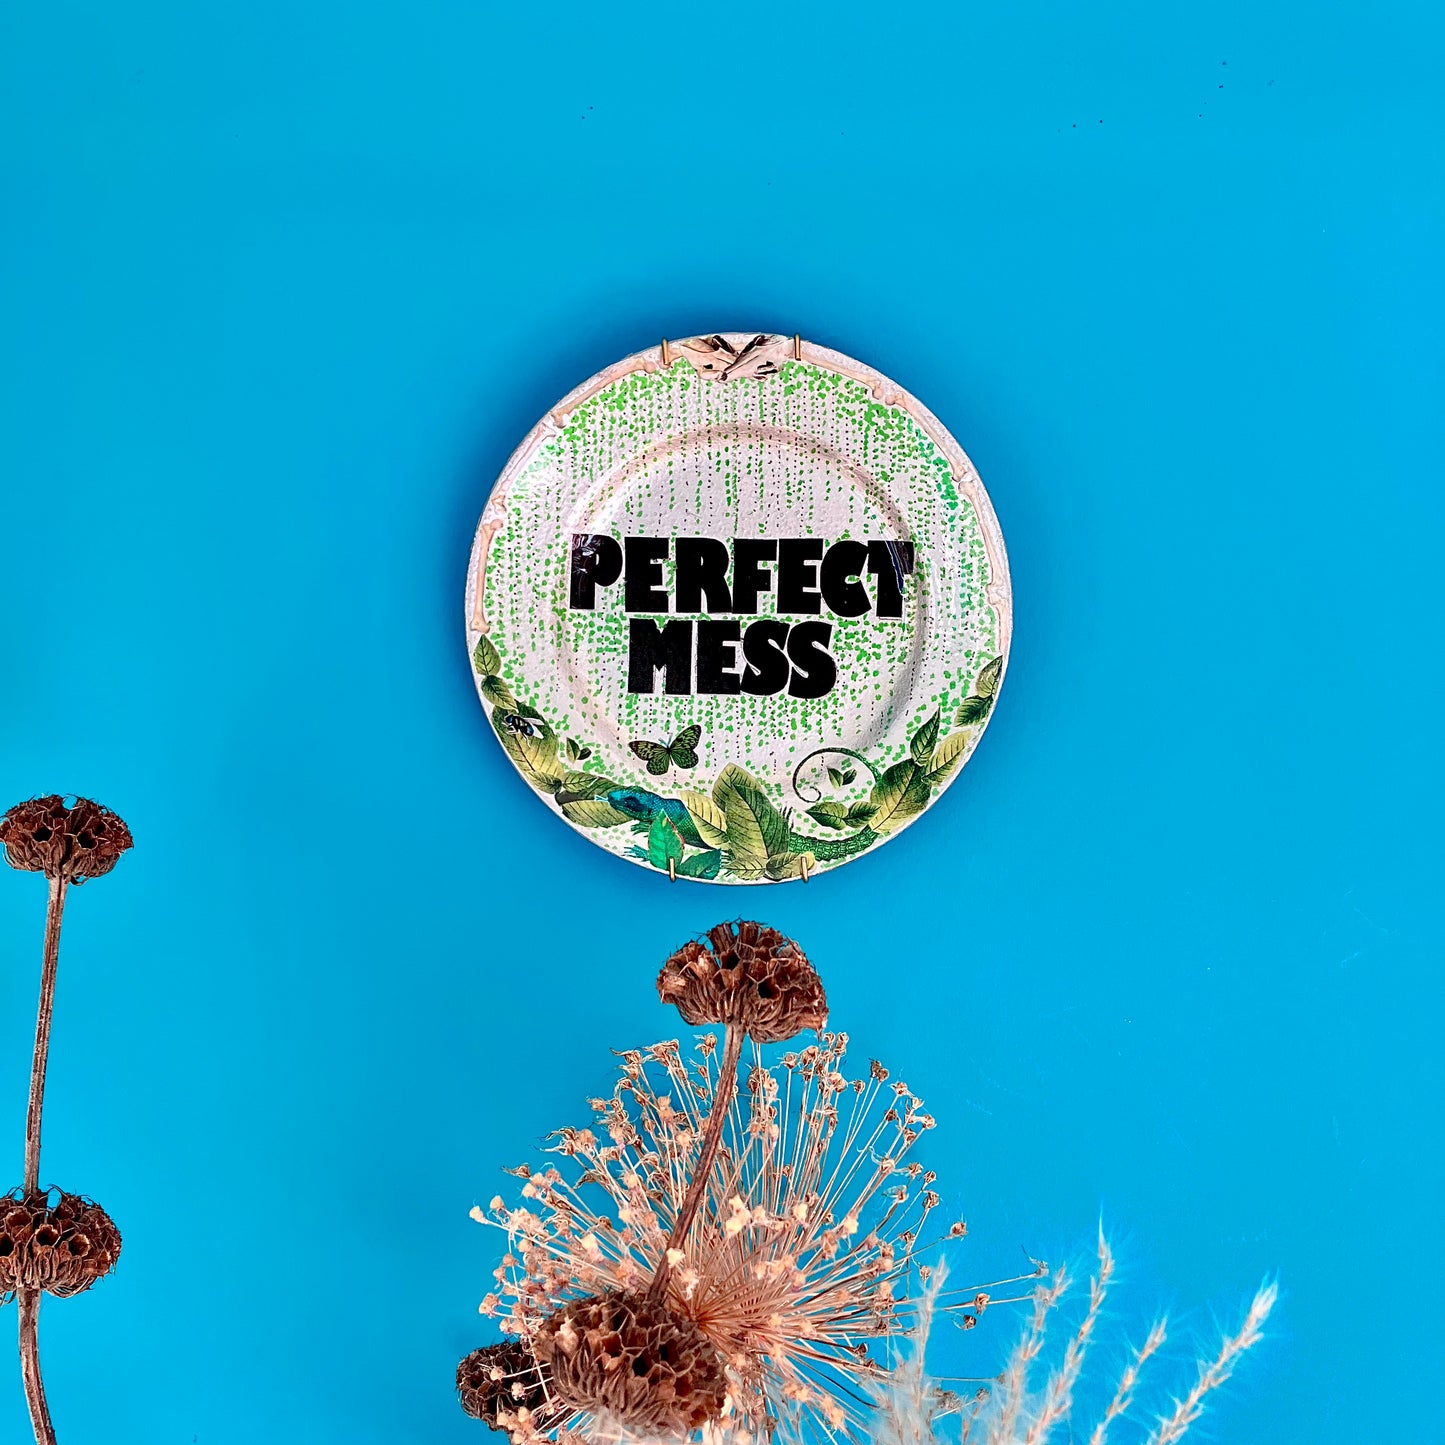 "Perfect Mess" Wall Plate by House of Frisson, hanging on a blue wall.